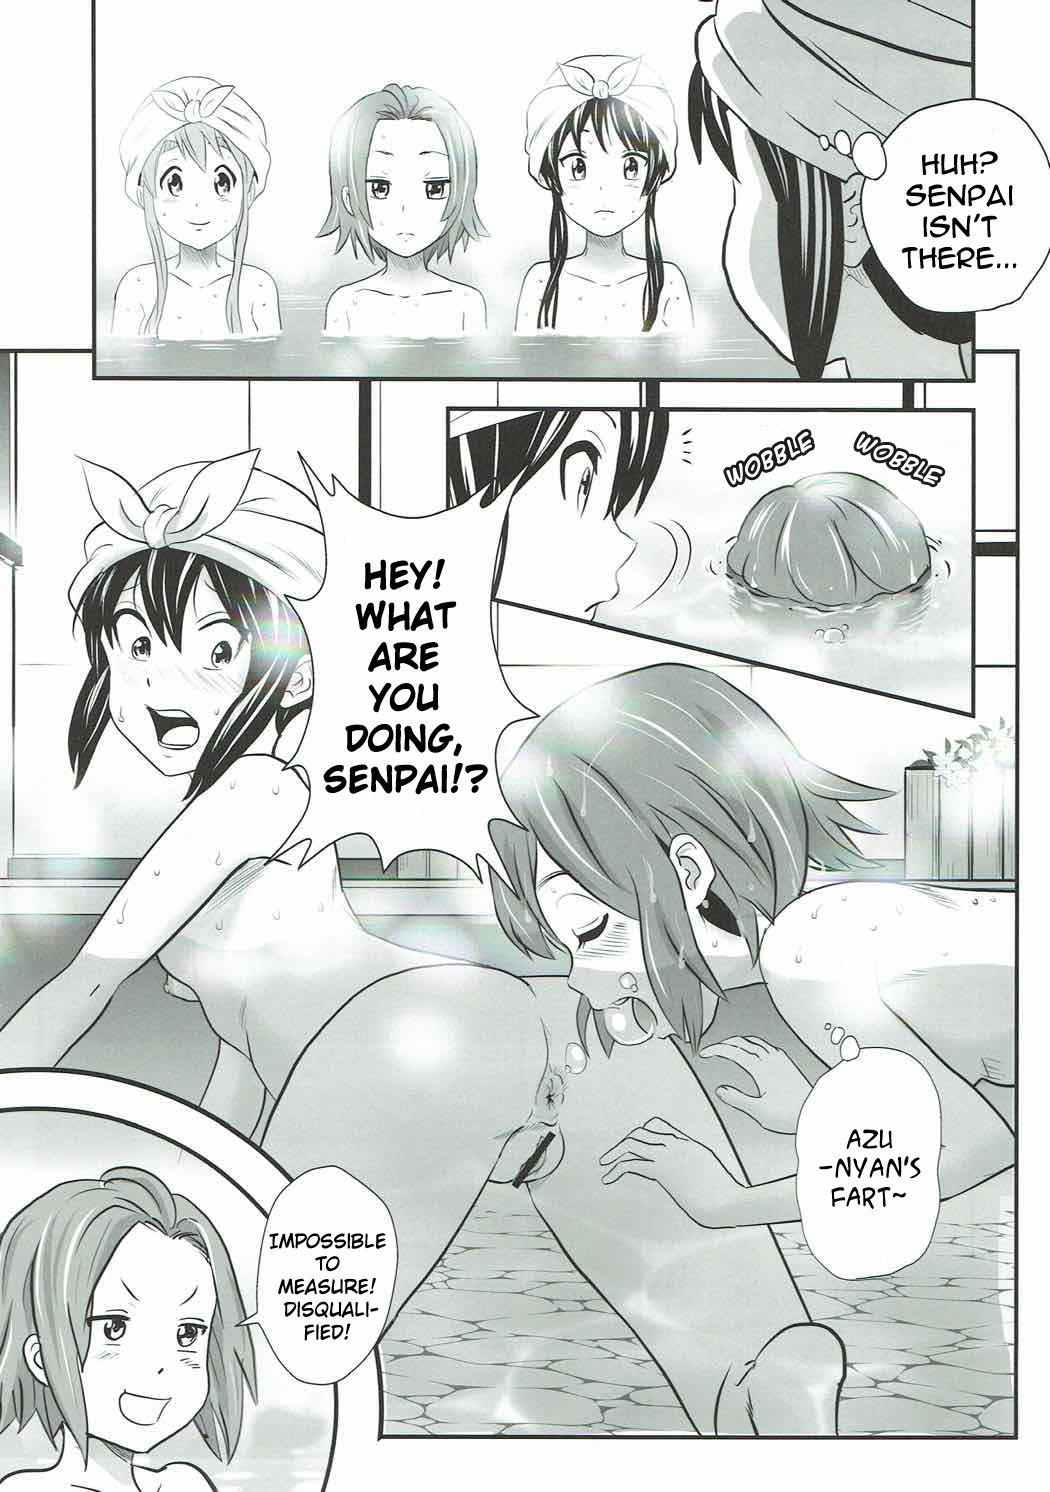 Small Boobs Houkago Unchi Time Final | After School Poop Time Final - K-on Boss - Page 8